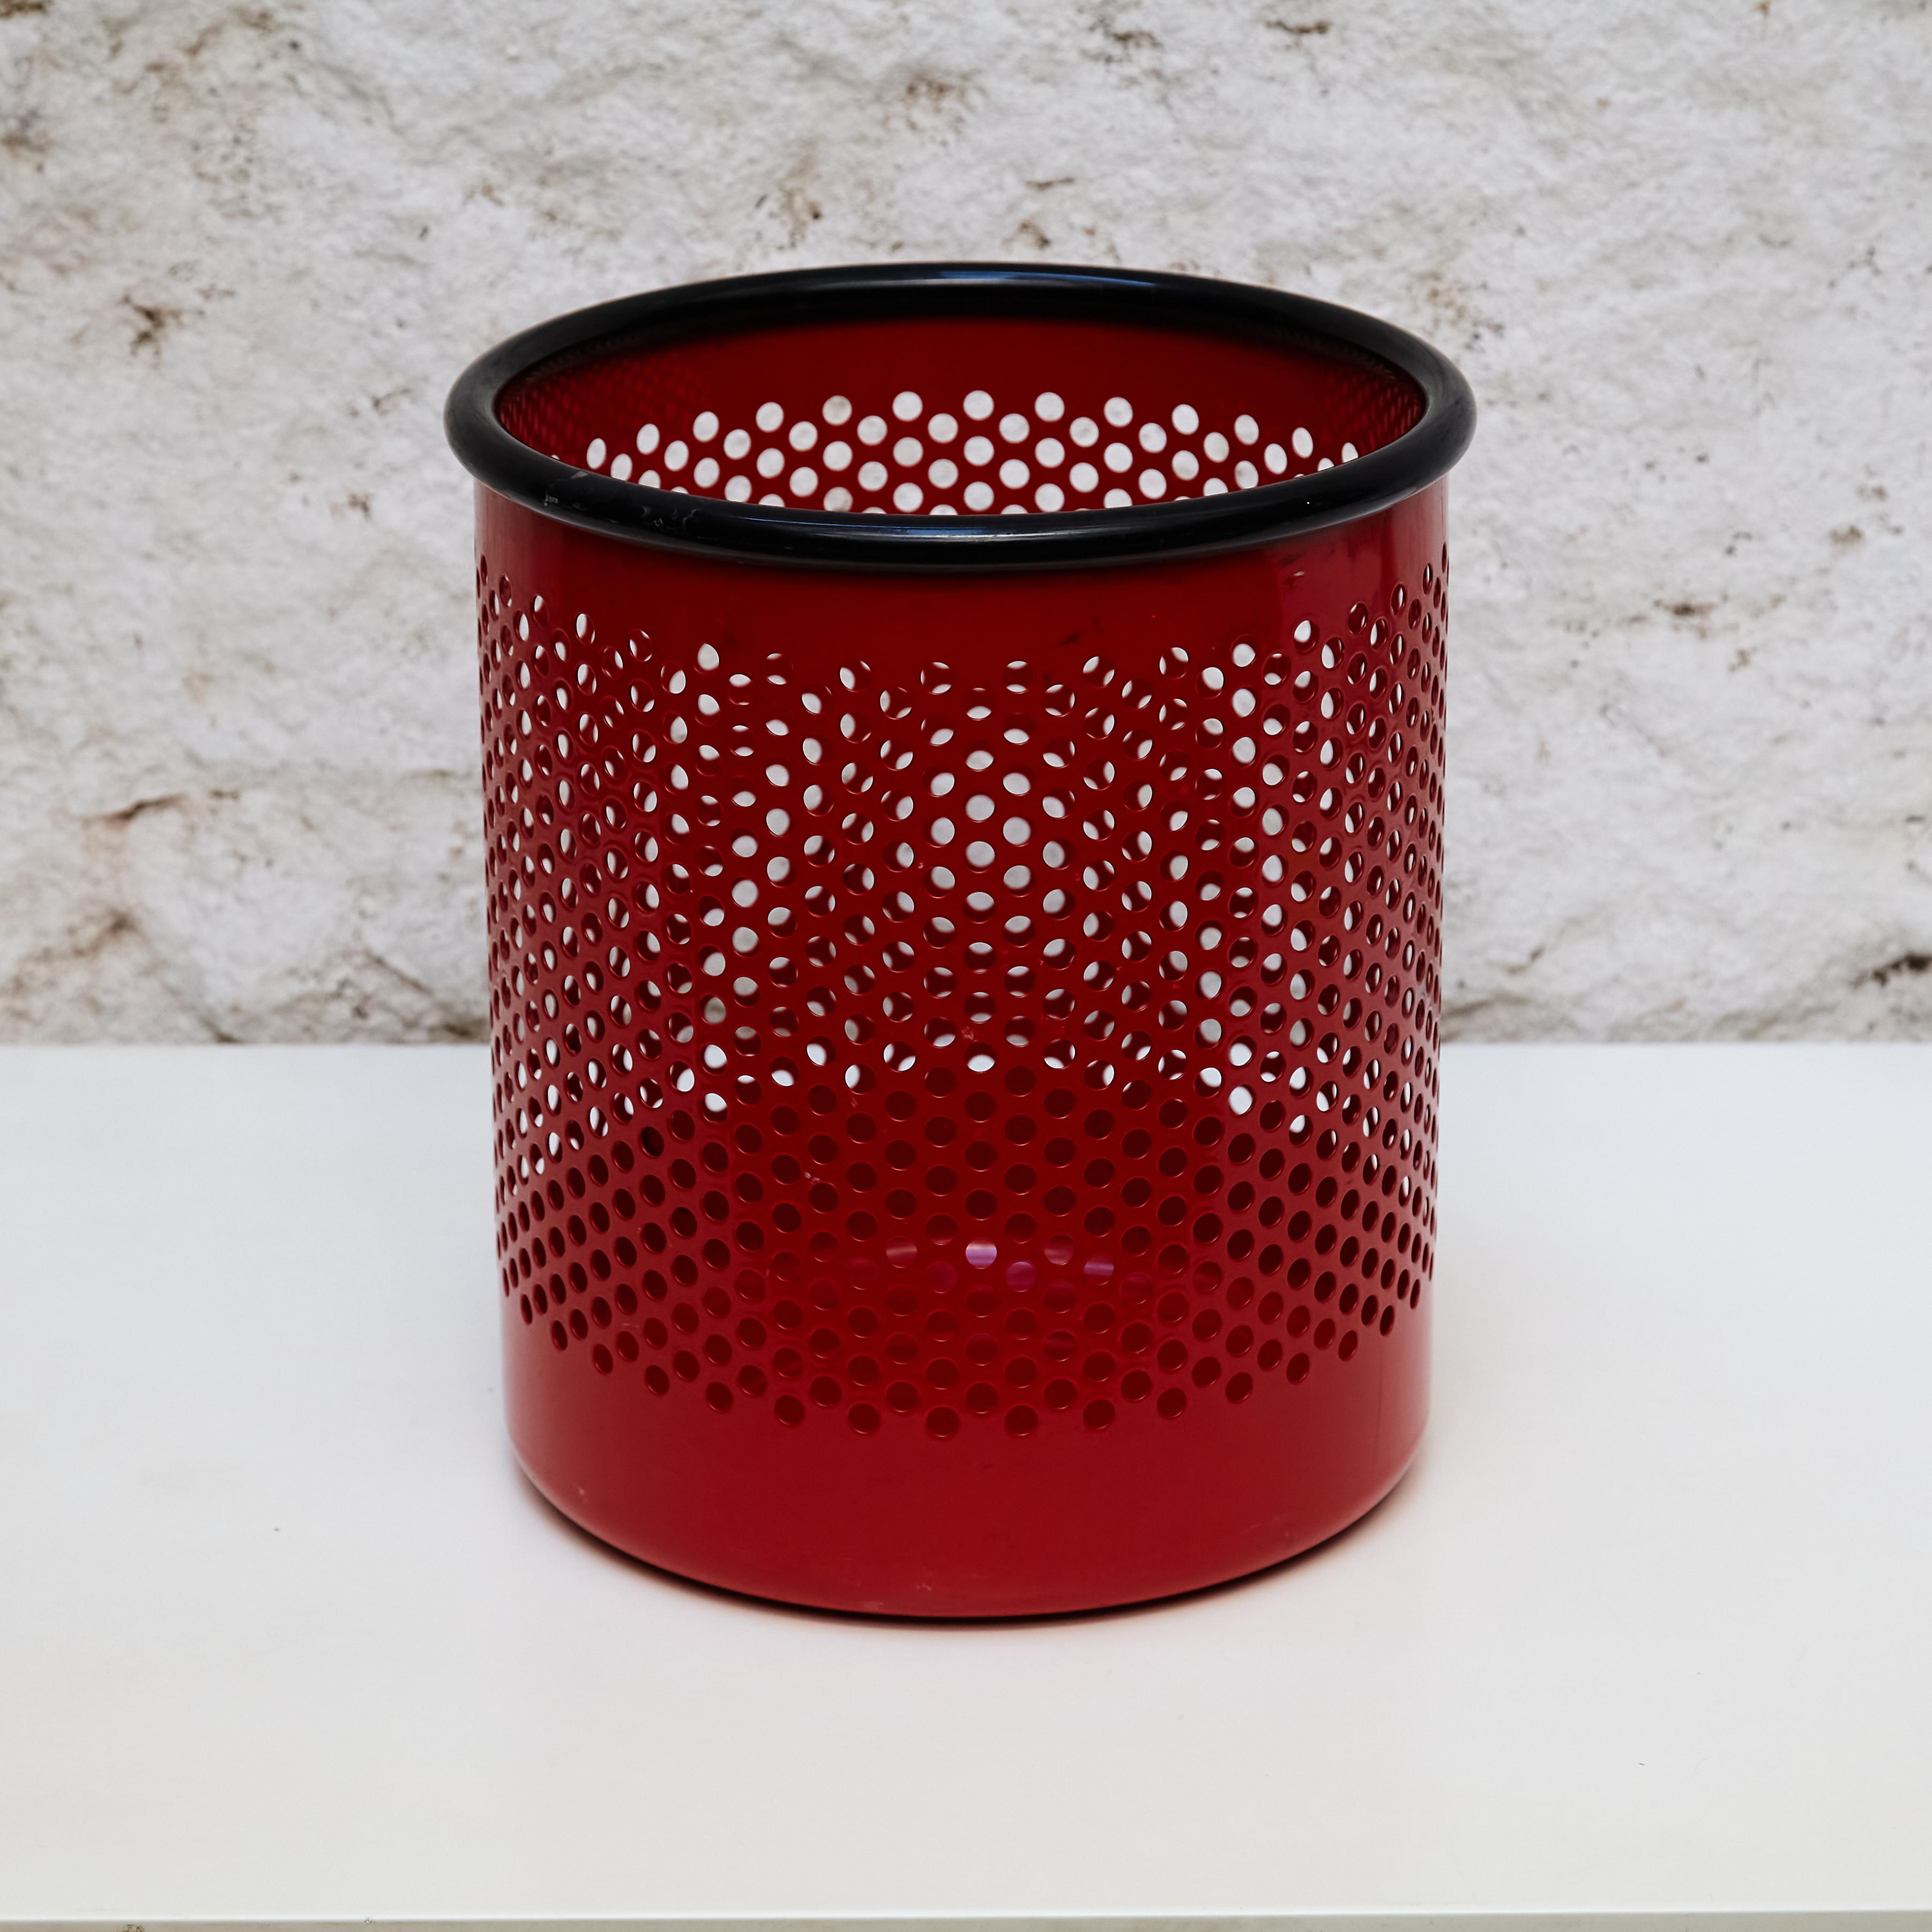 Basket 'Cribbio' by Raul Barbieri and Giorgio Marianelli.

Manufactured in Italy, circa 1980.

In good original condition, with consistent with age and use, preserving a beautiful patina with some scratches.

Dimensions: 
Diam 15 cm x H 54